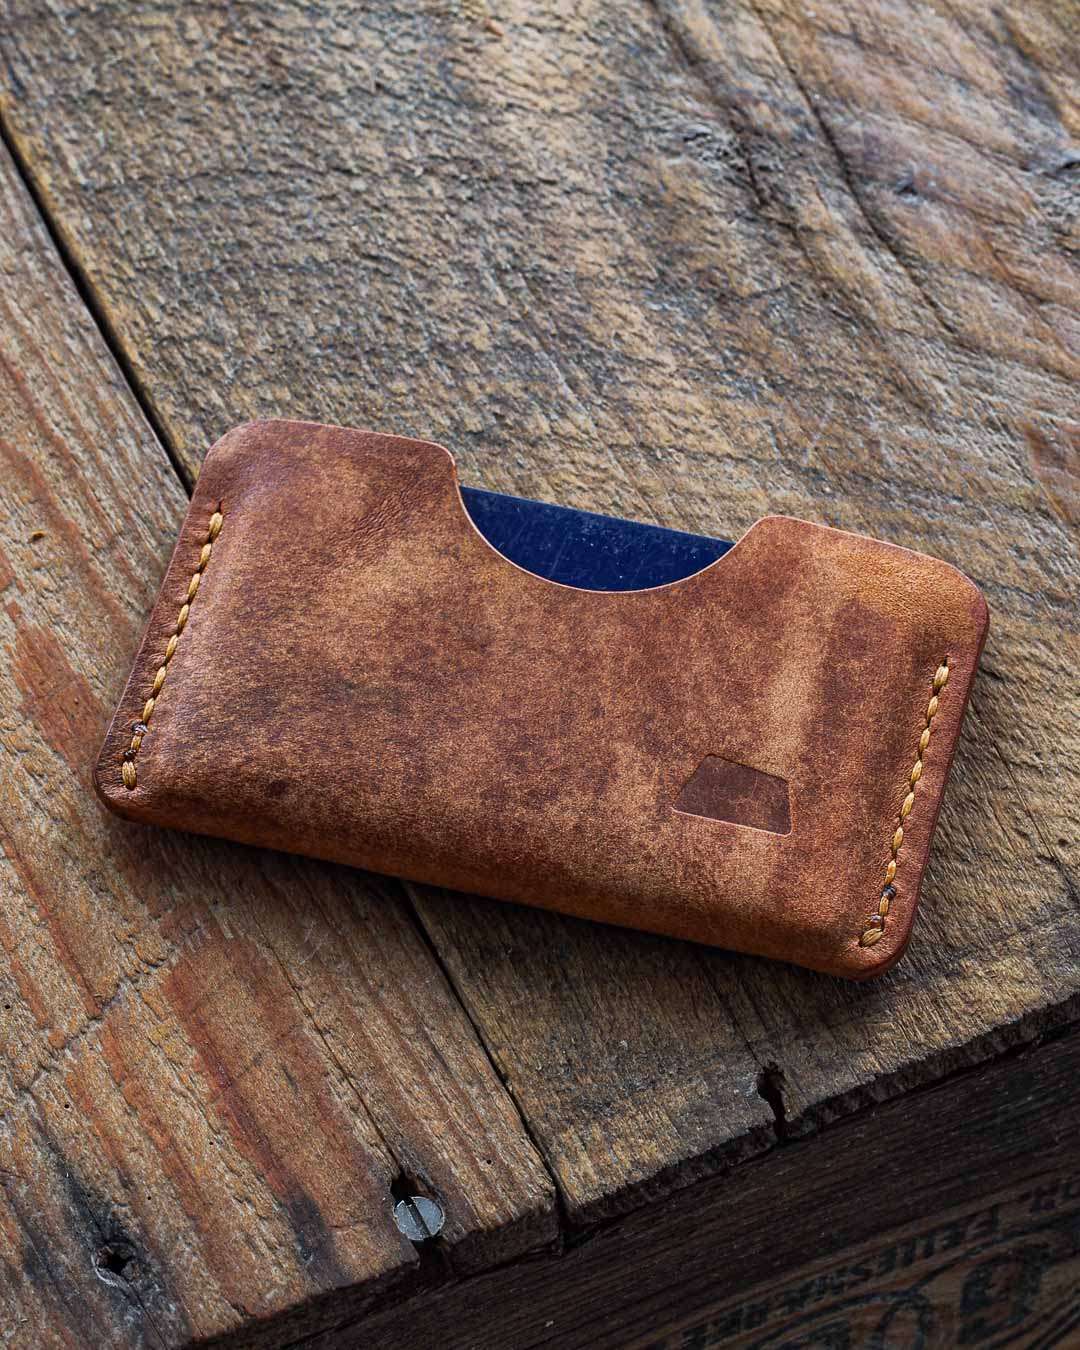 Luava handmade leather wallet handcrafted leatherwallet cardholder card holder cardwallet vegetable tanned absolute back in use